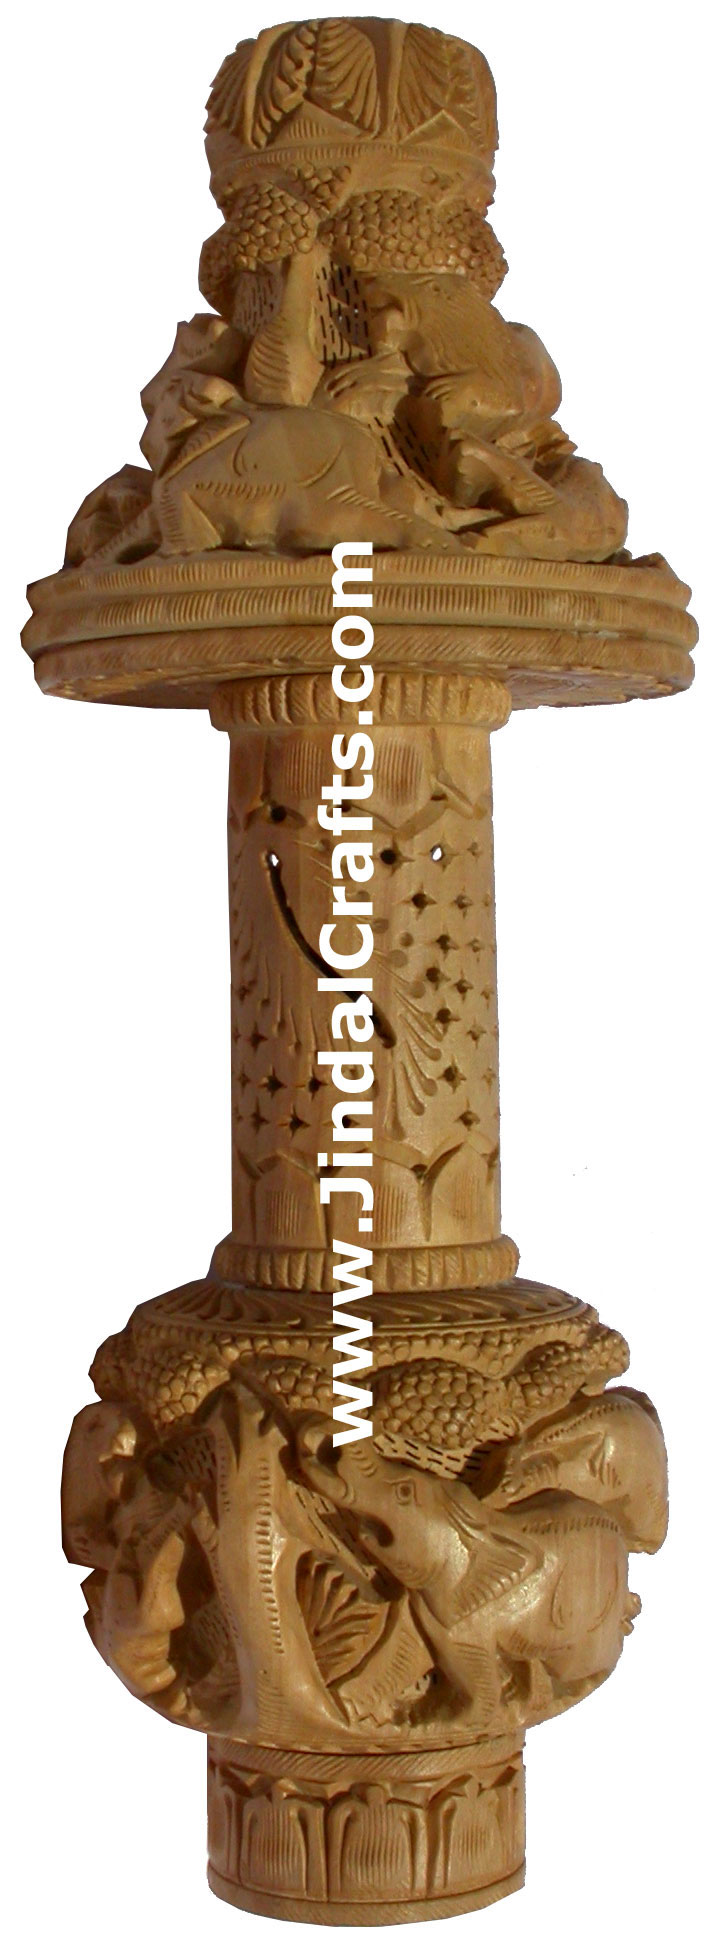 Handmade Wooden Jungle Table Lamp Indian Carving Art